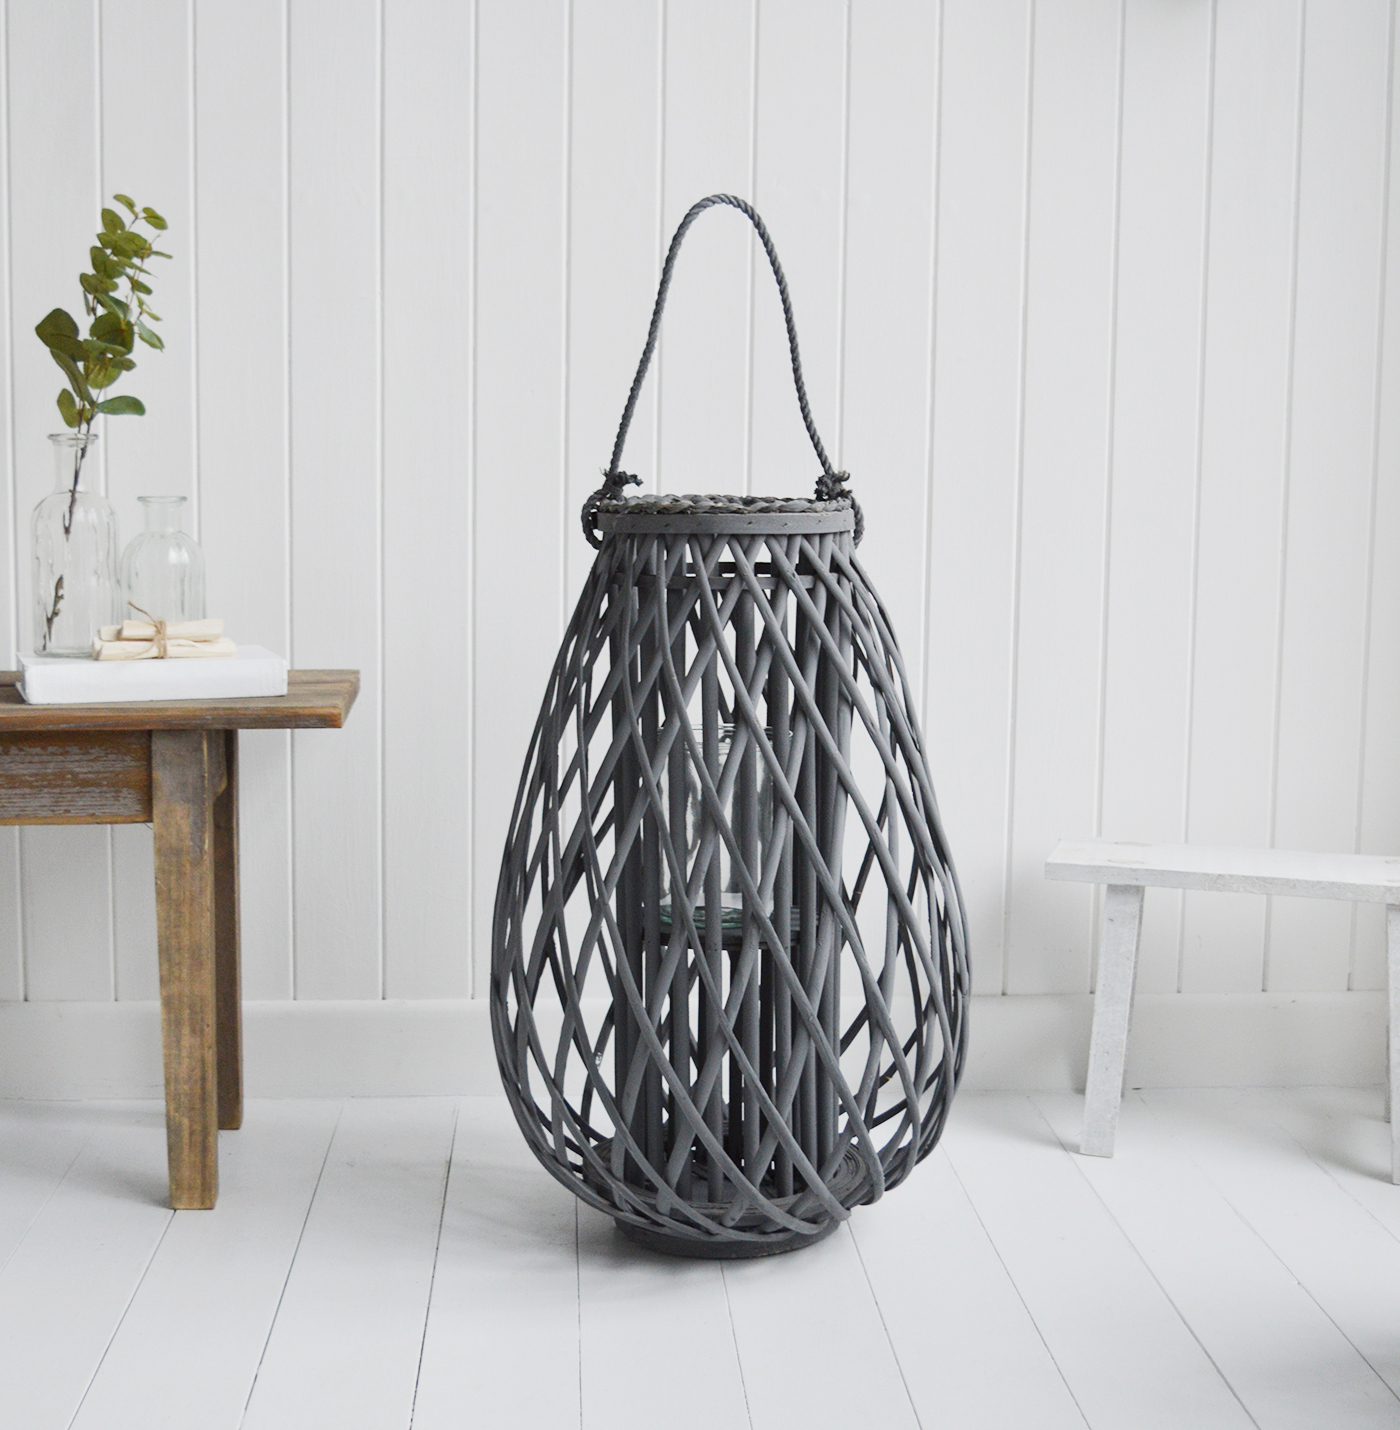 Large Dark Grey Lantern - New England Coastal & Country Furniture and Home Decor for beauriful homes. Hallway, Living Room Bedroom and Bathroom furniture